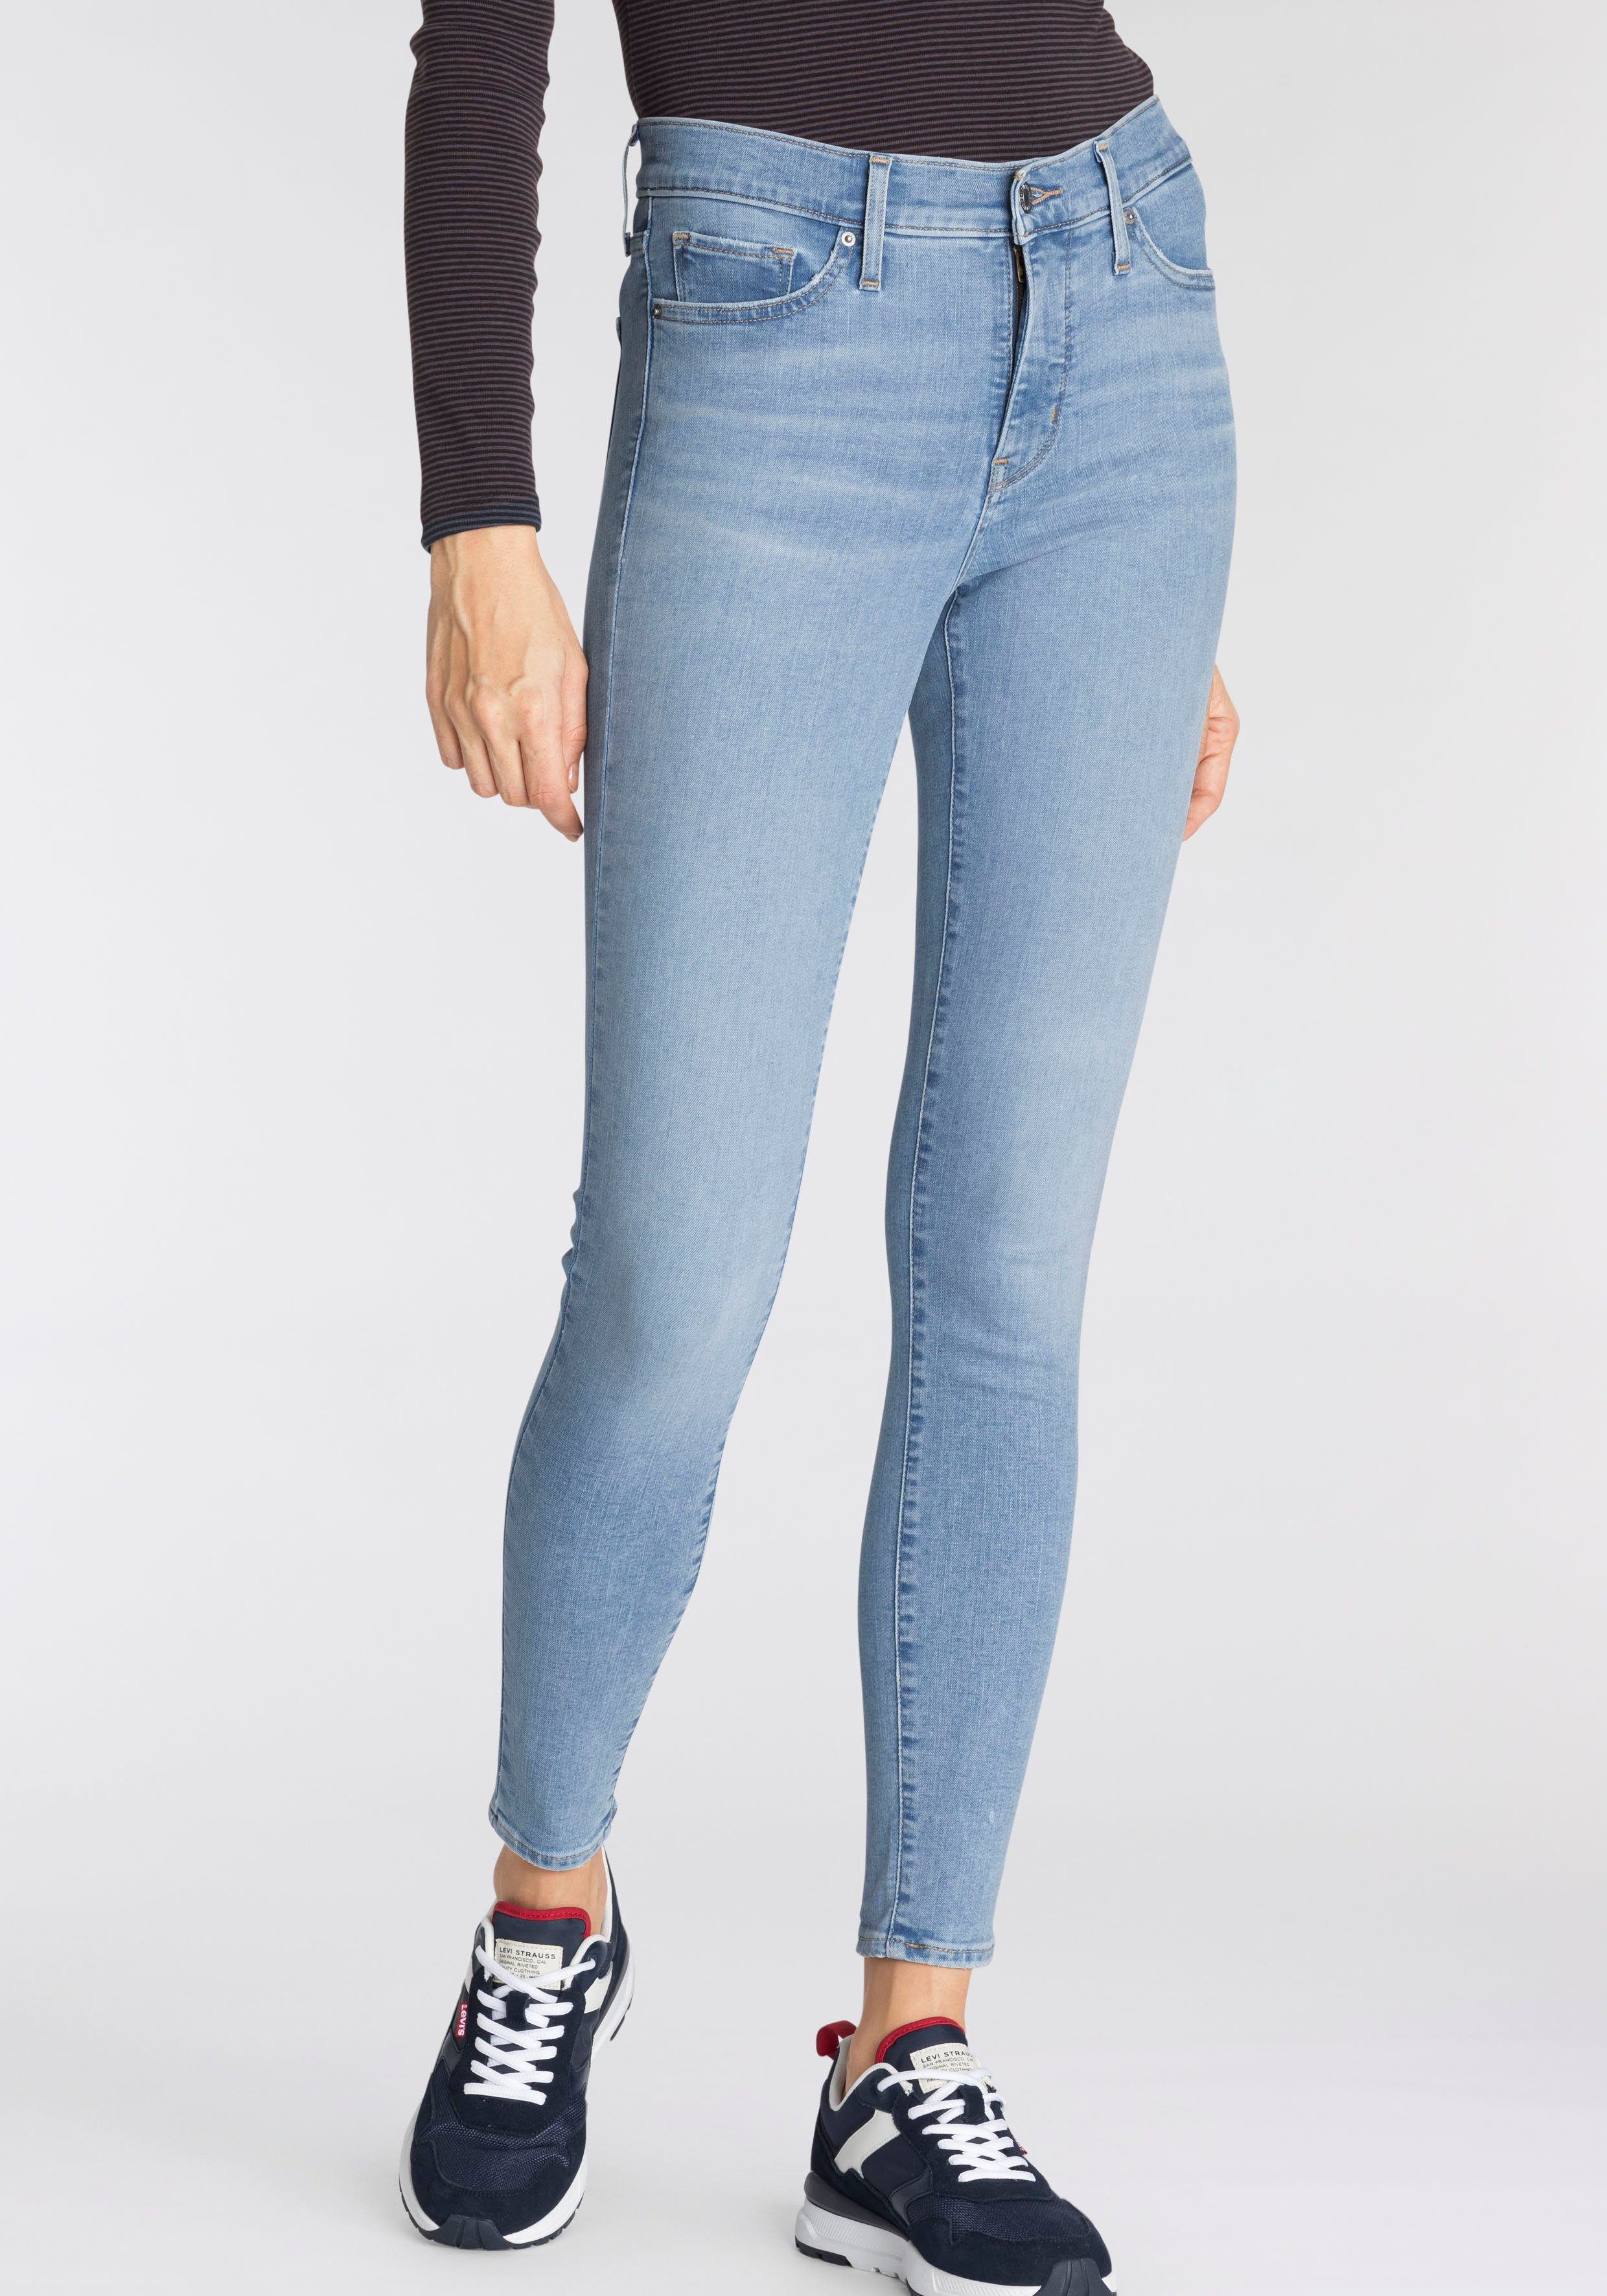 Levi's® Skinny-fit-Jeans 310 Shaping Super Skinny, Shaping Skinny- Jeans 310  von Levi's®